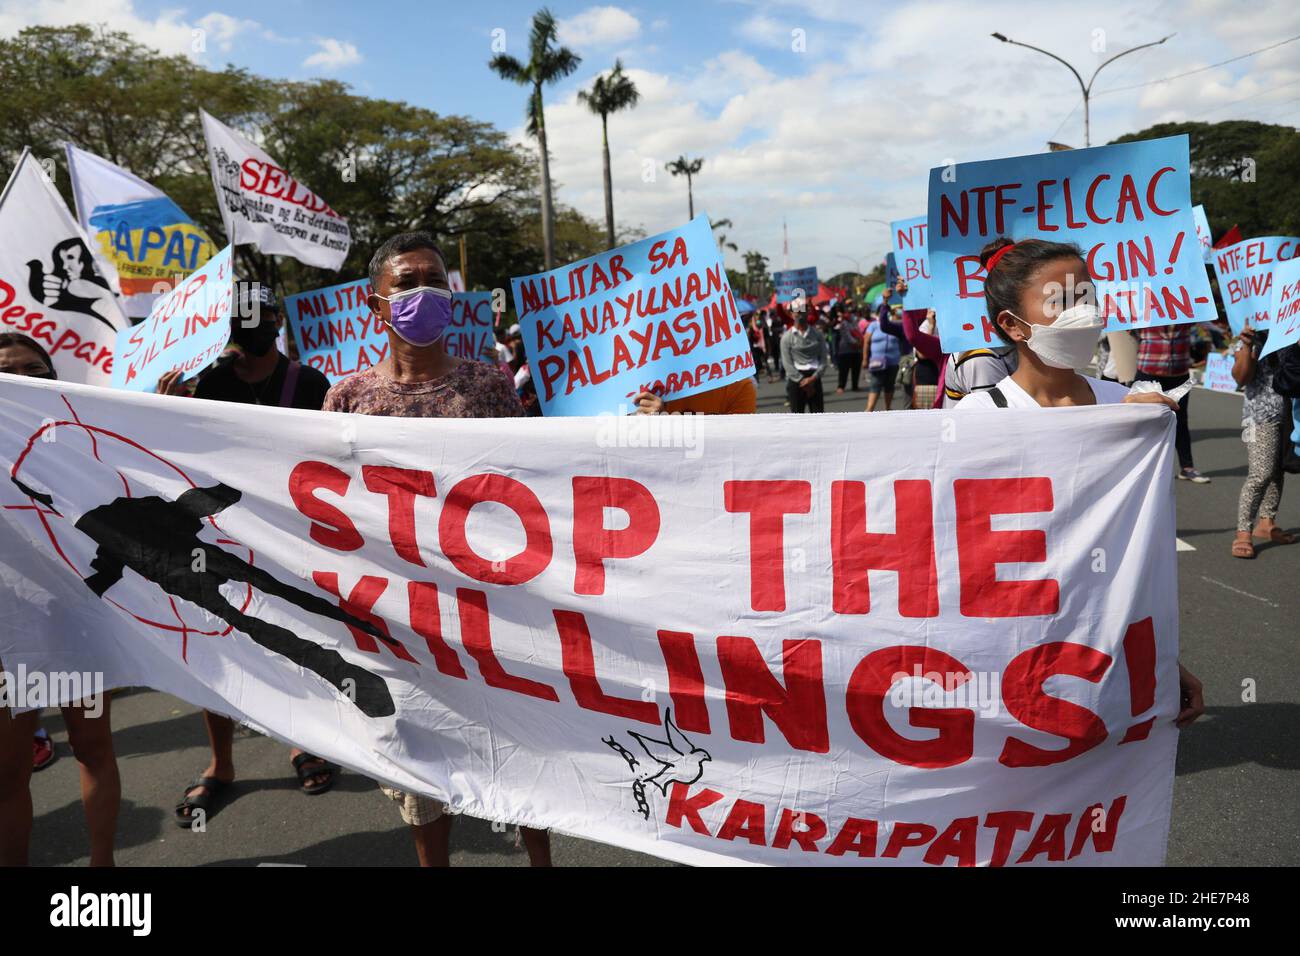 Protesters Carry Signs During A Protest To Mark The 73rd International Human Rights Day At The